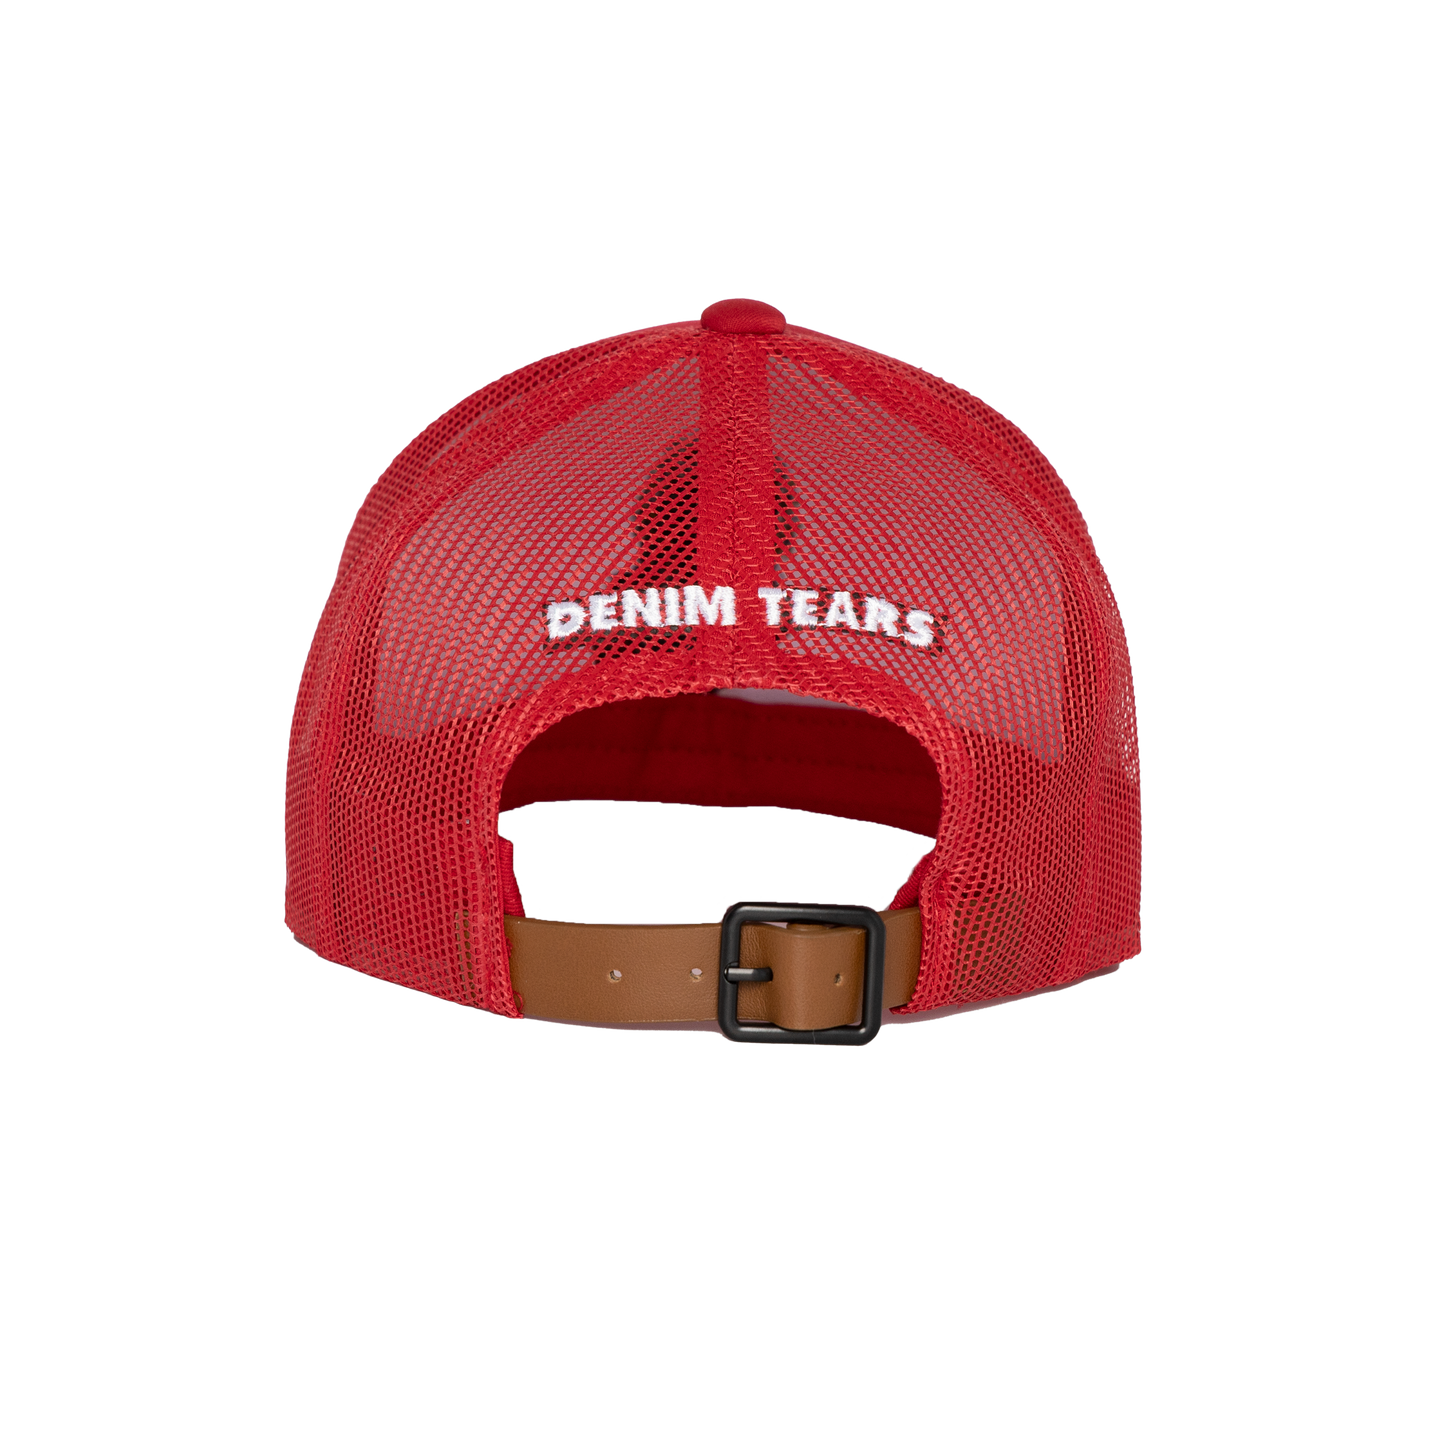 Crown Made of Cotton Red Trucker Hat